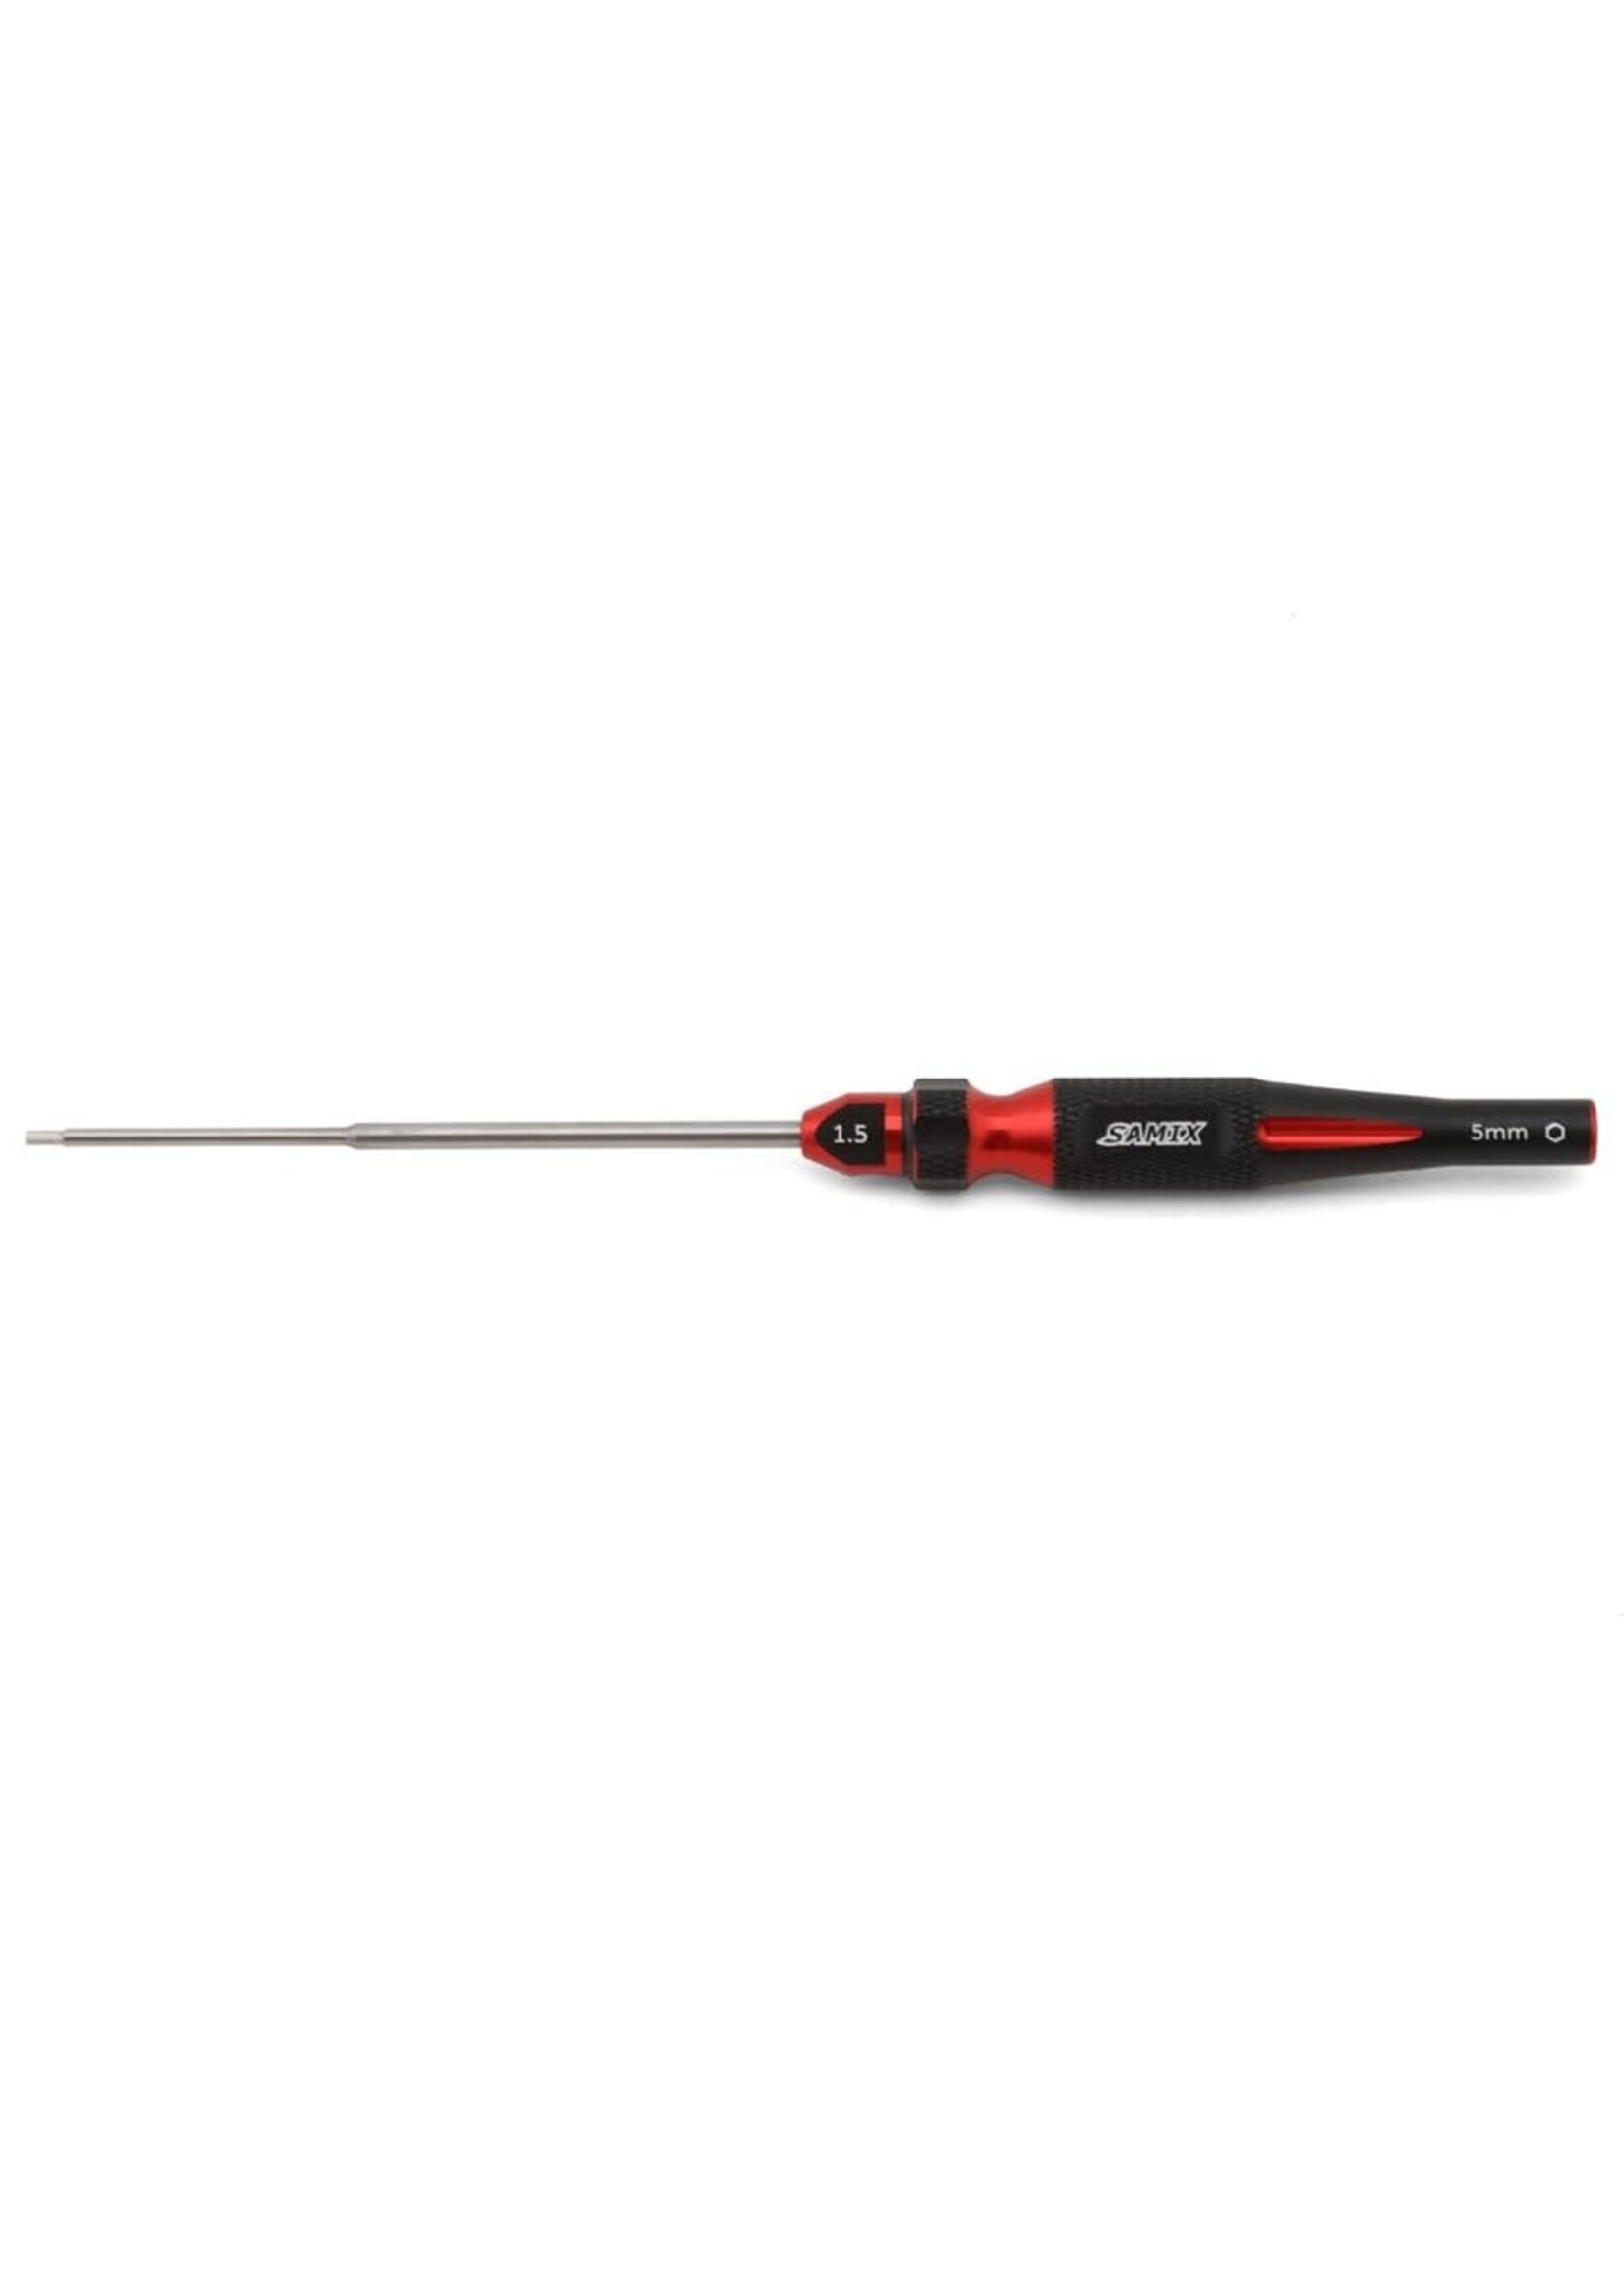 Samix SAMTRX4M-SD15-RD Samix TRX-4M 2-in-1 Hex Wrench/Nut Driver (Red) (1.5mm Hex/5mm Nut)